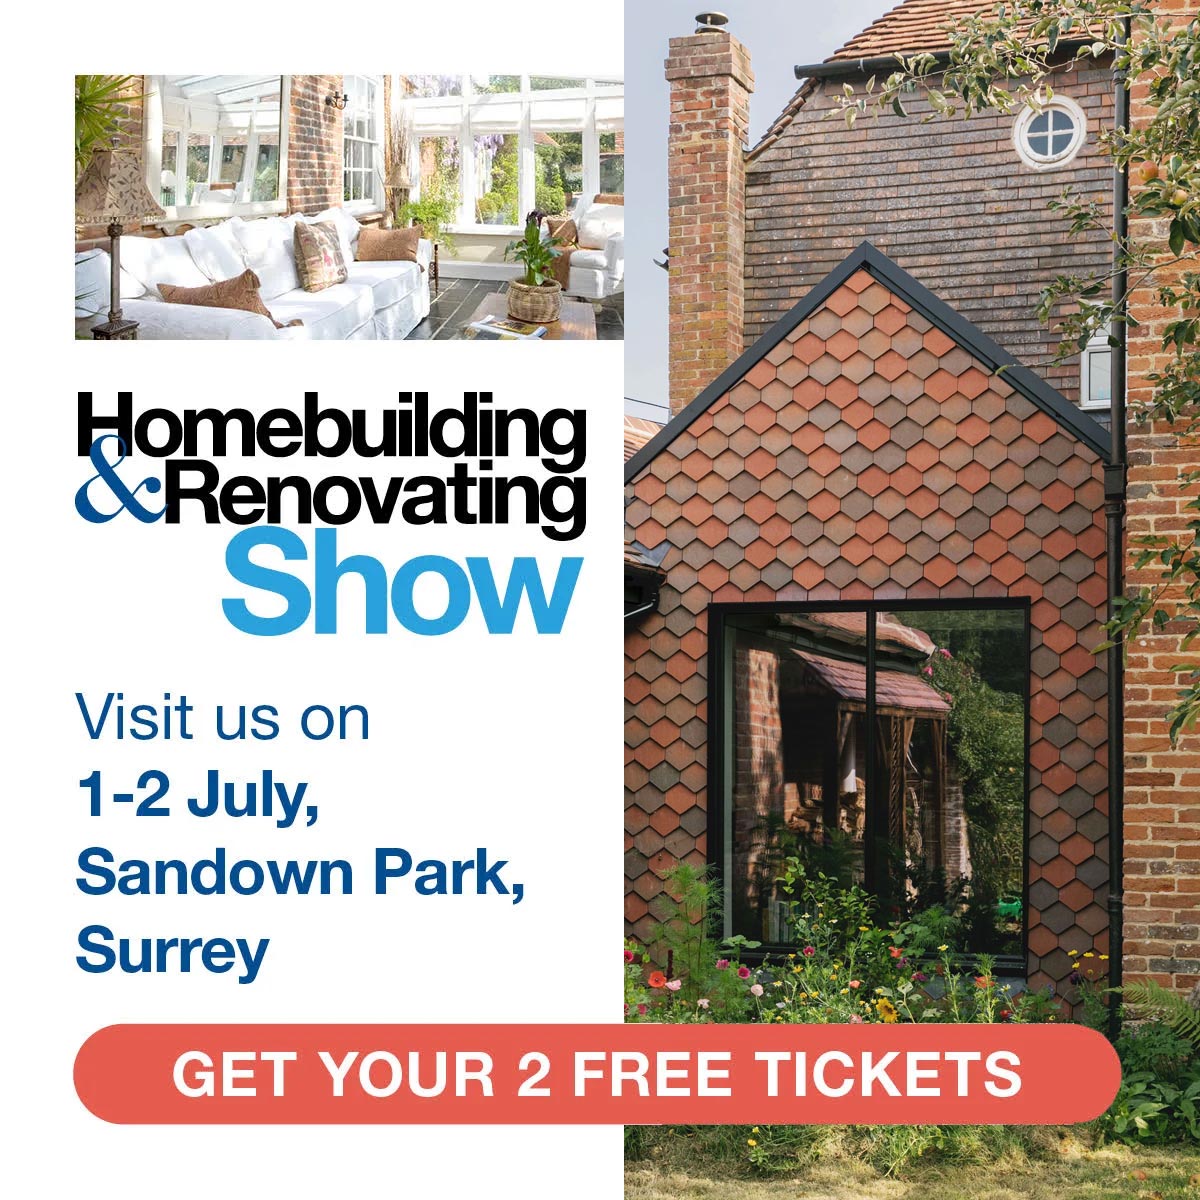 We'll be attending the Homebuilding & Renovating Show at Sandown Park in Surrey next week! Click the link for 2 FREE tickets! 🎟 eventdata.uk/Forms/Hom00Vis… @HBR_Show #tradeshow #renovation #ukmanufacturing